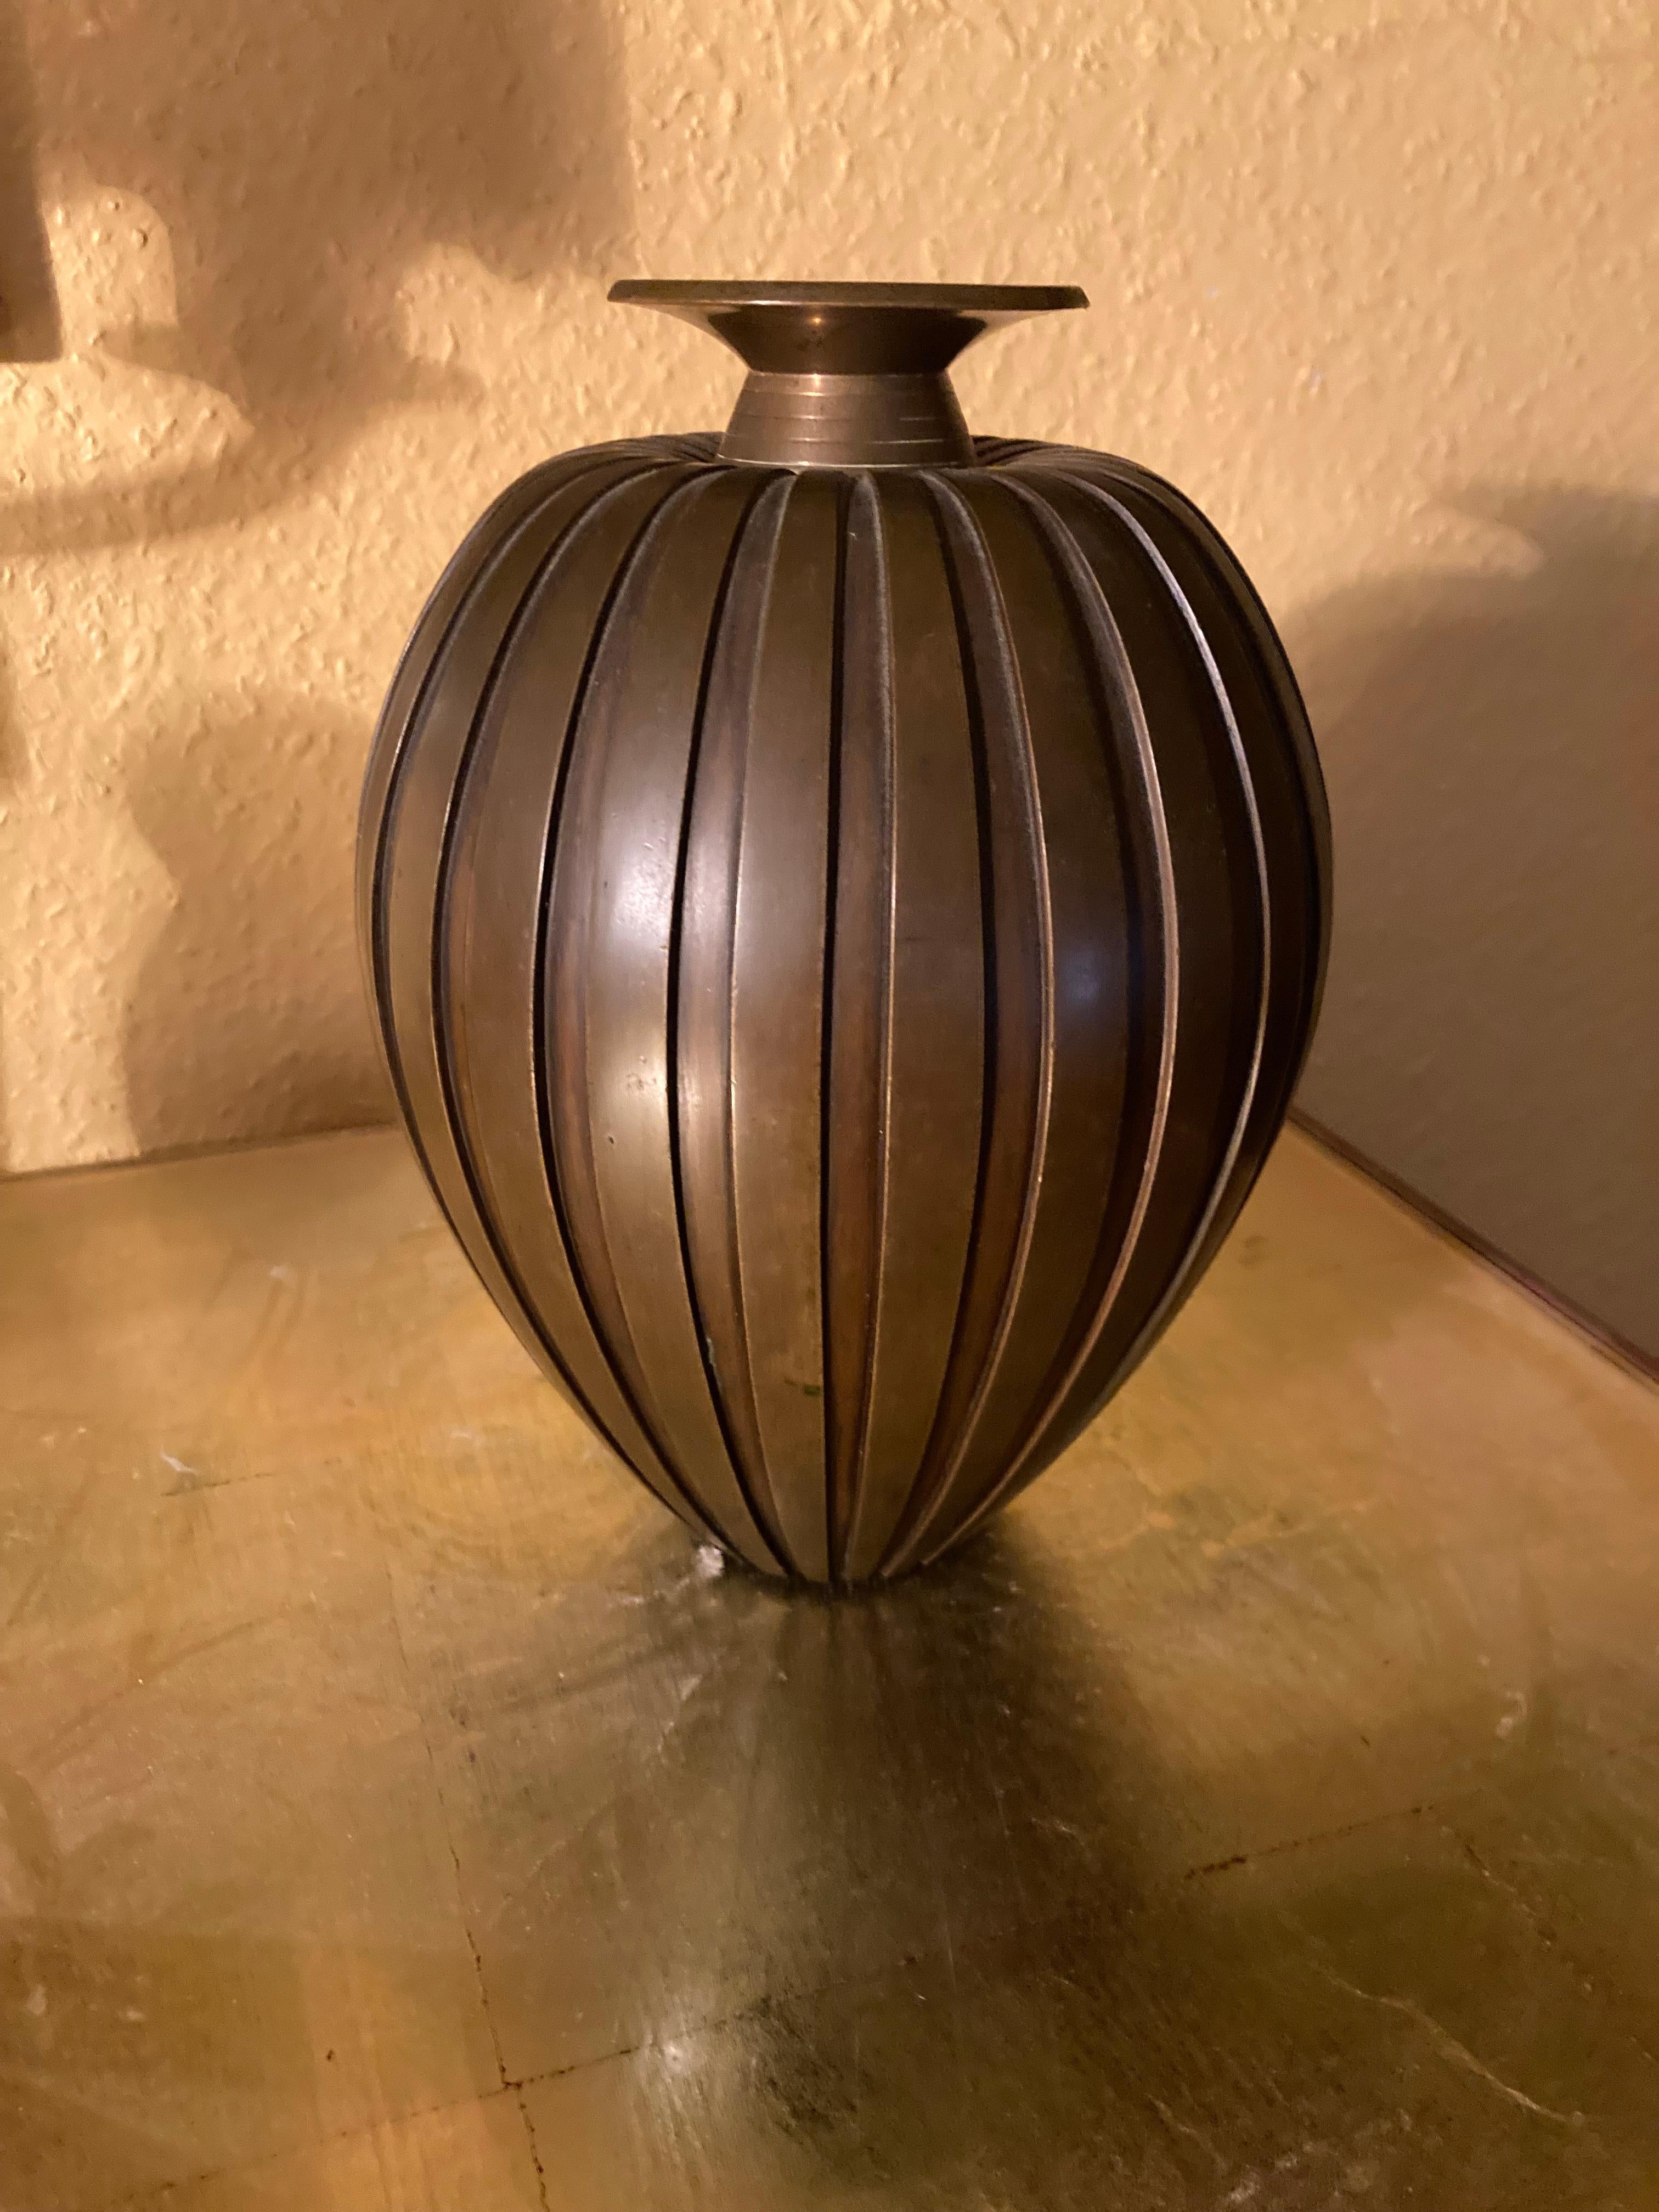 An elegant bronze vase by Evan Jensen, 1930s. Denmark. The vase is marked and numbered in the bottom. Removable cylinder. It is not so much a vase as a noble decorative Design object of very high quality from the heavy bronze and the quality of